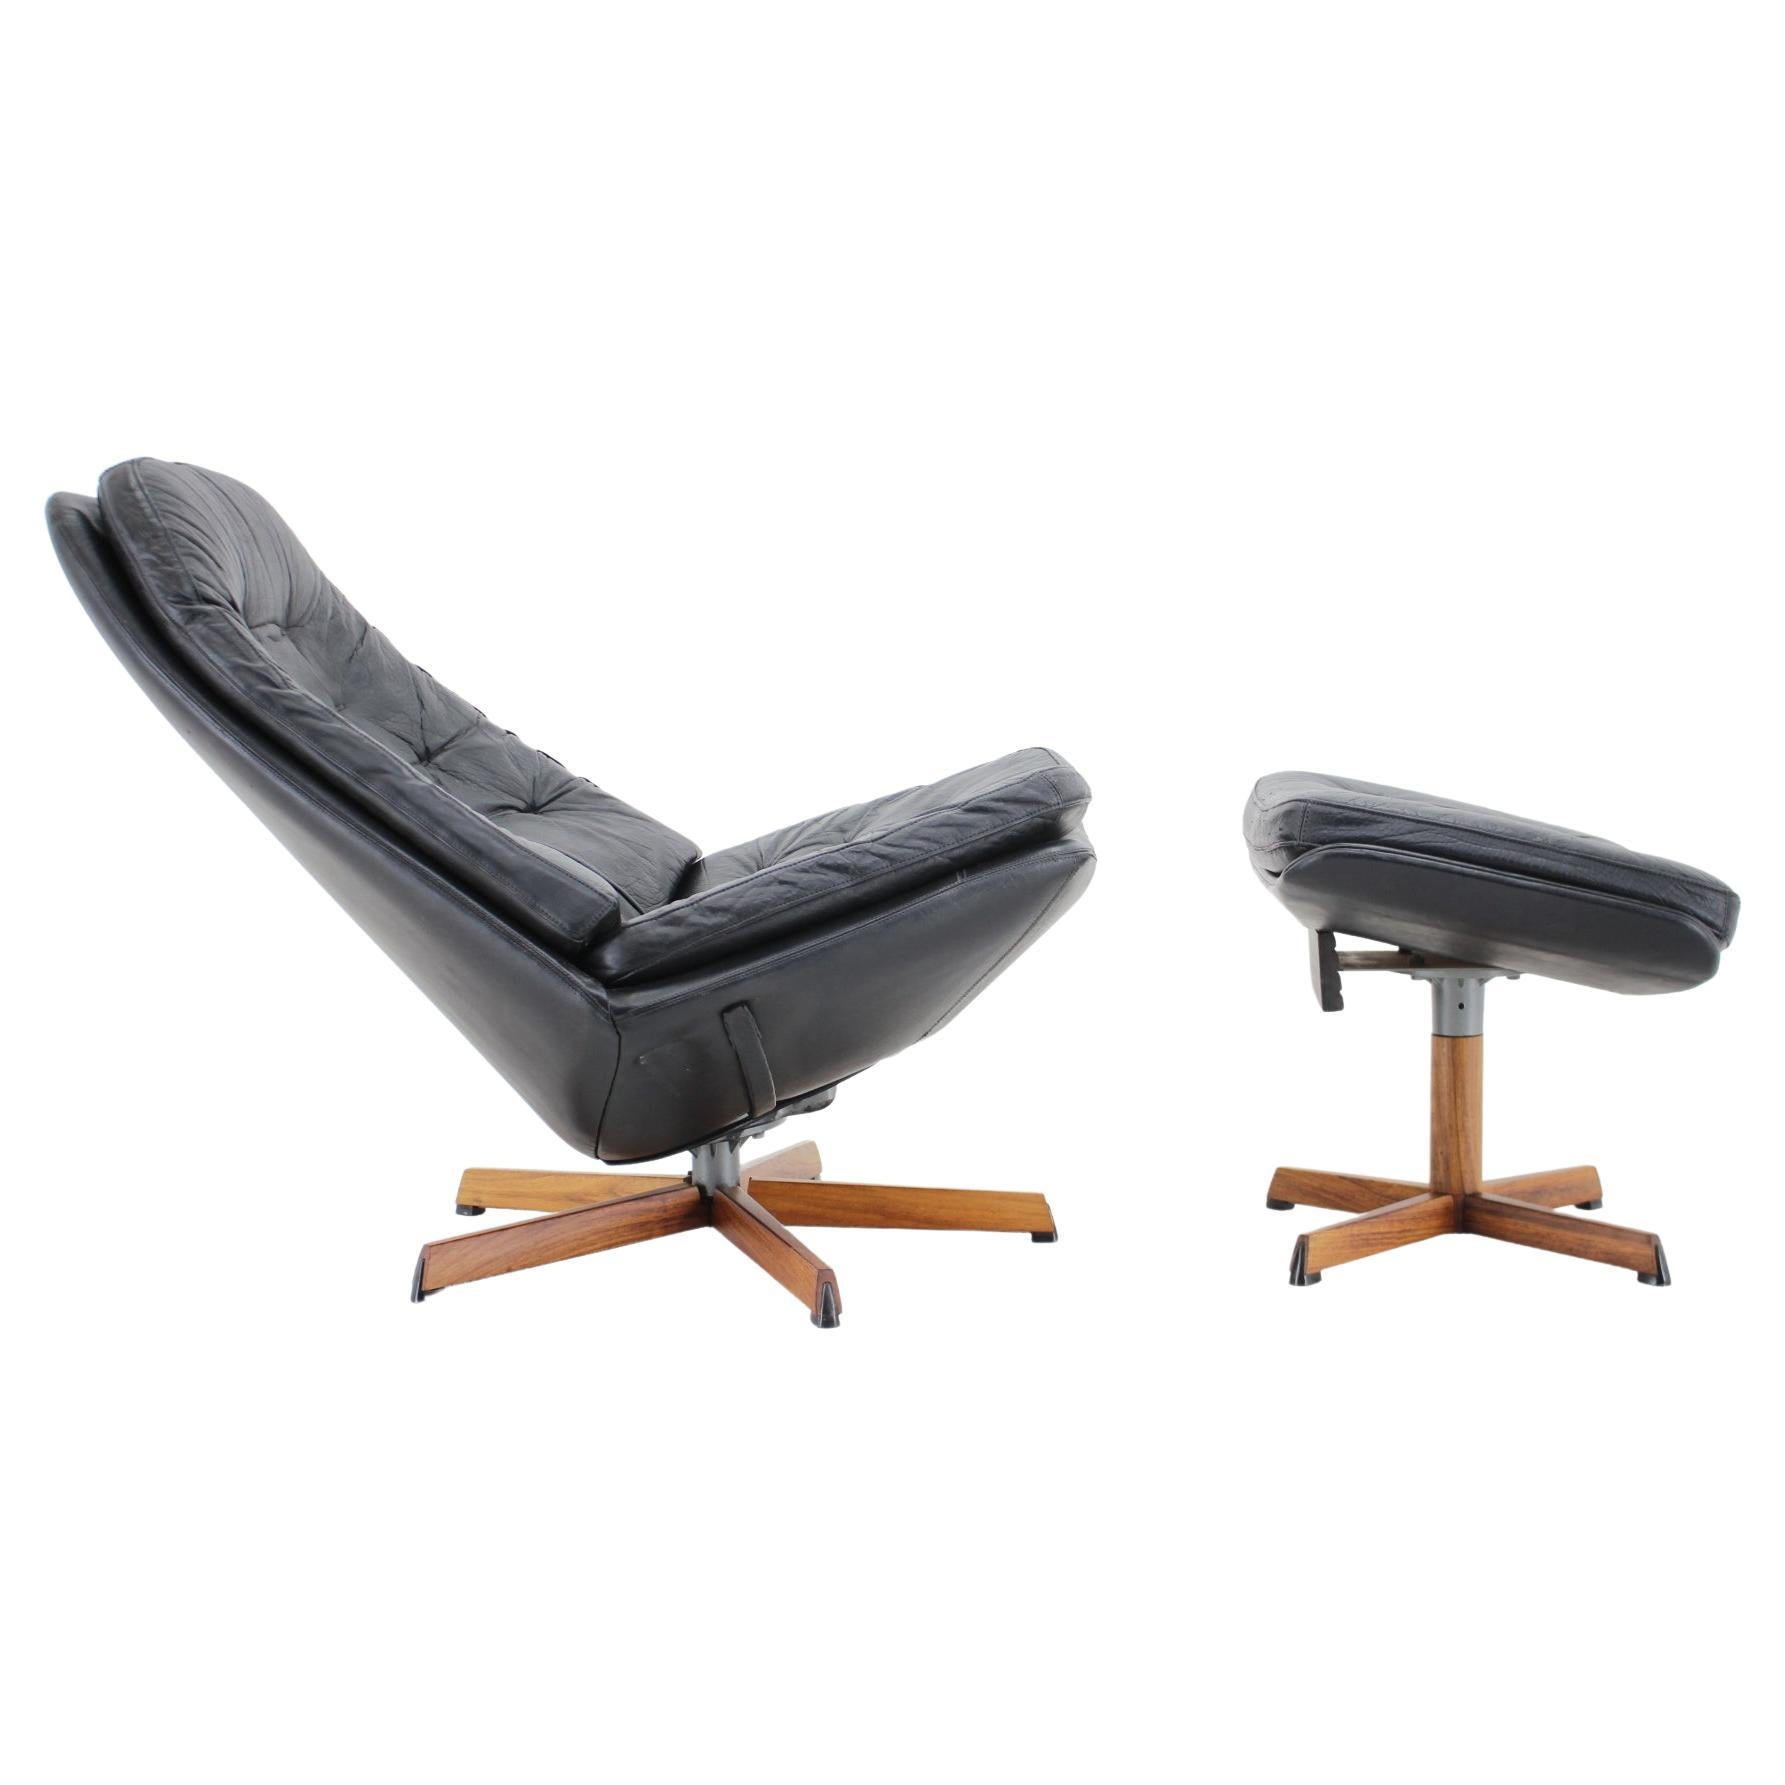 1960s Madsen and Schubell Black Leather Reclining Chair and Stool, Denmark